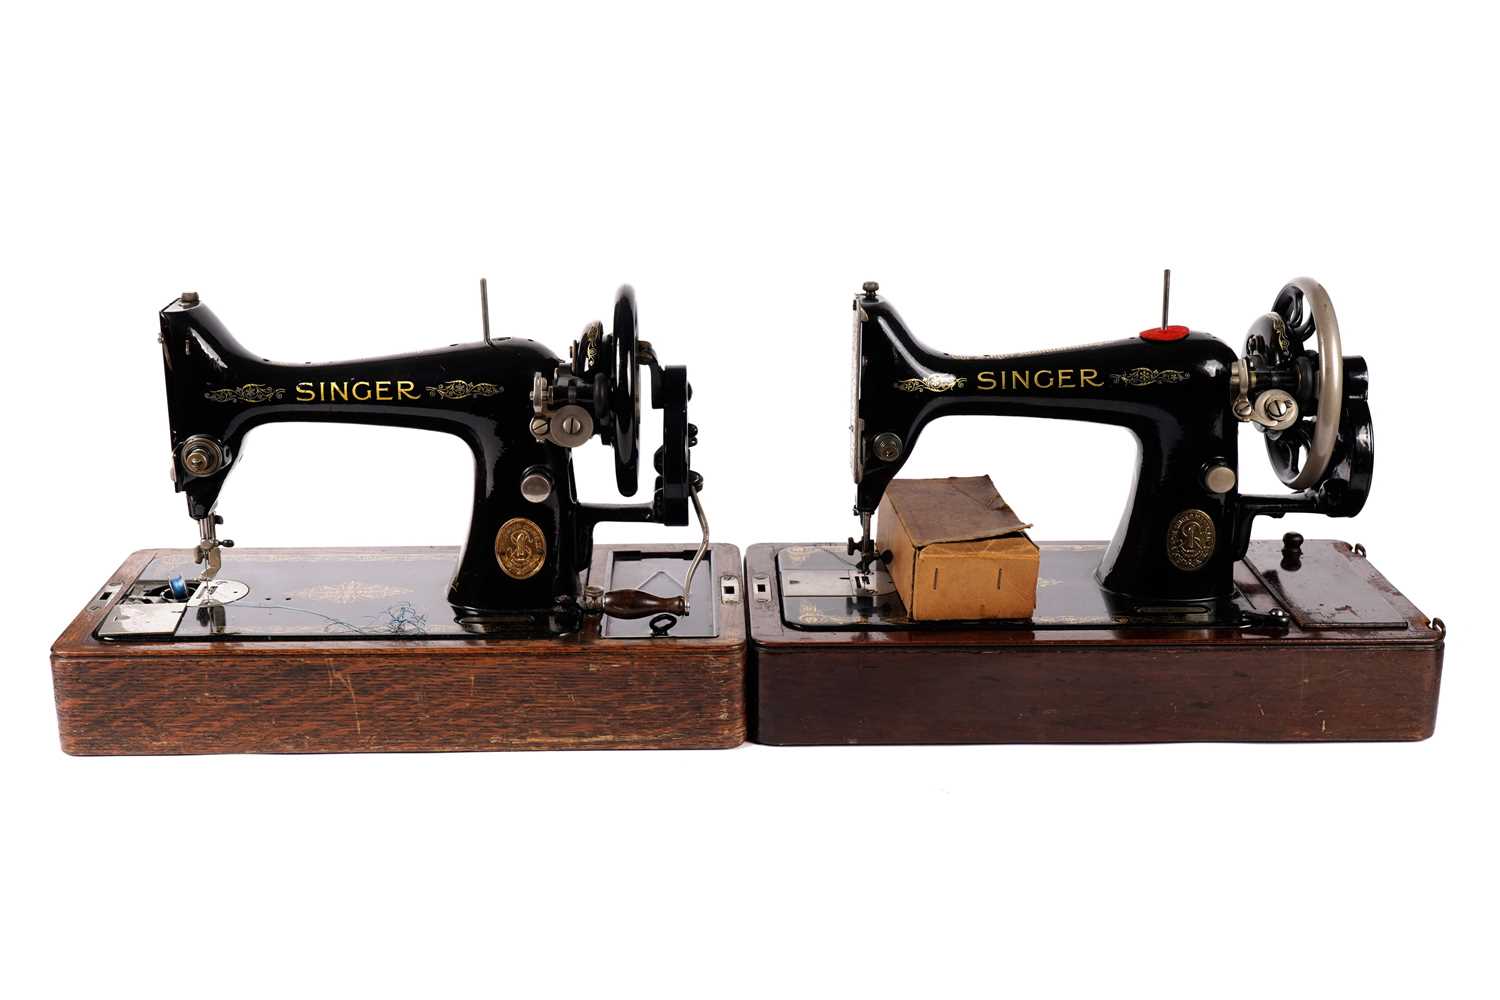 Two portable Singer sewing machines